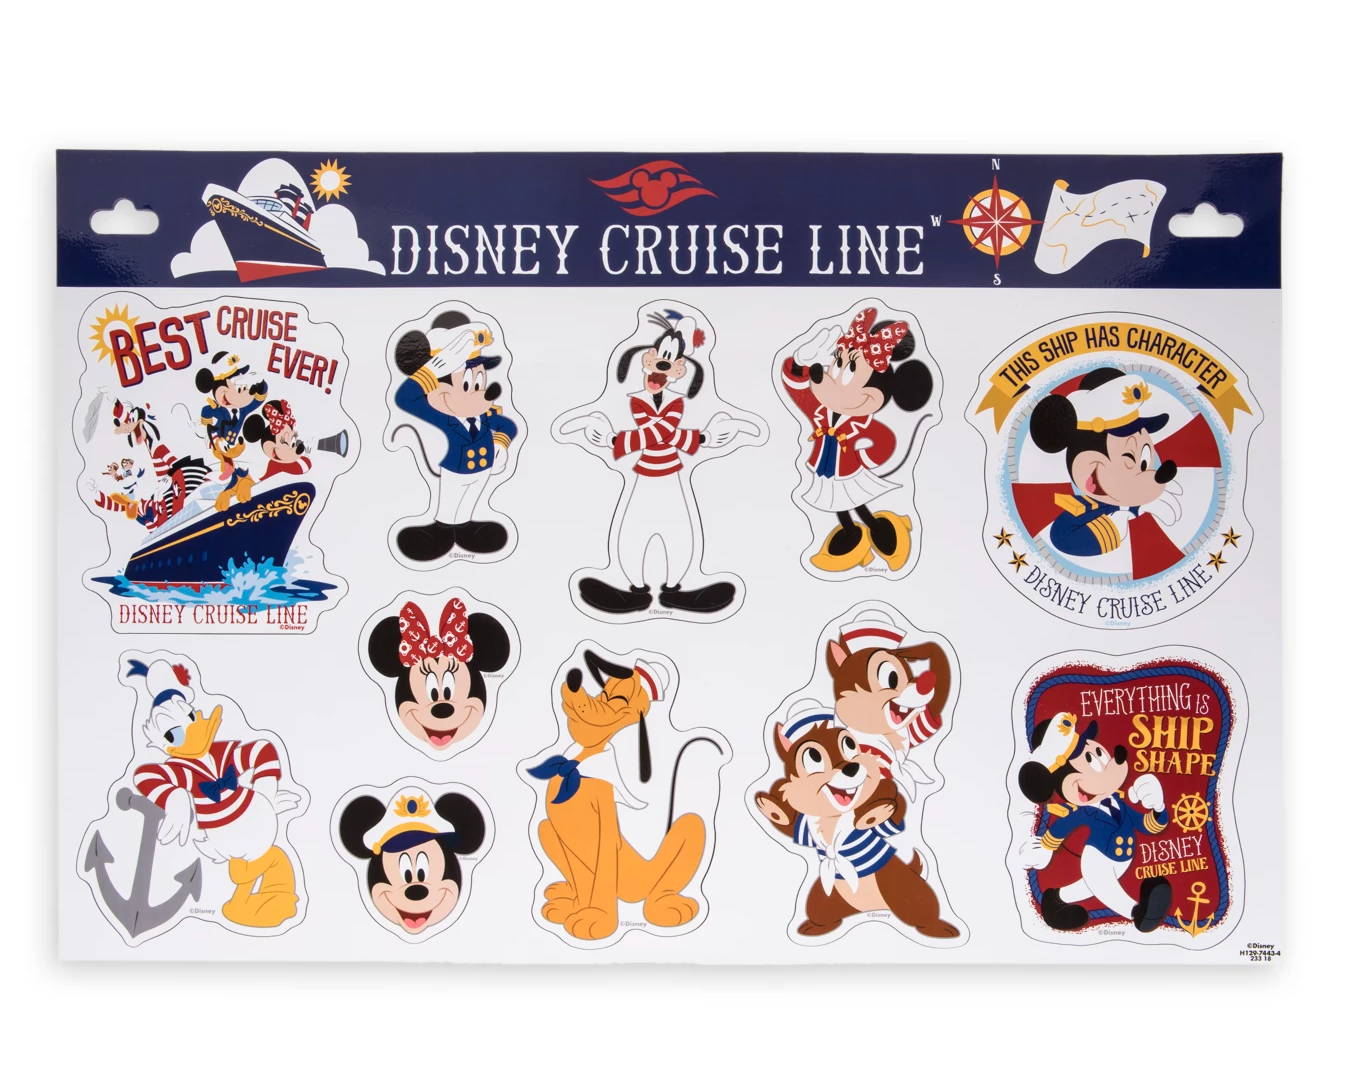 Disney Cruise Line Captain Mickey and Crew Stateroom Door Magnet Set New Sealed